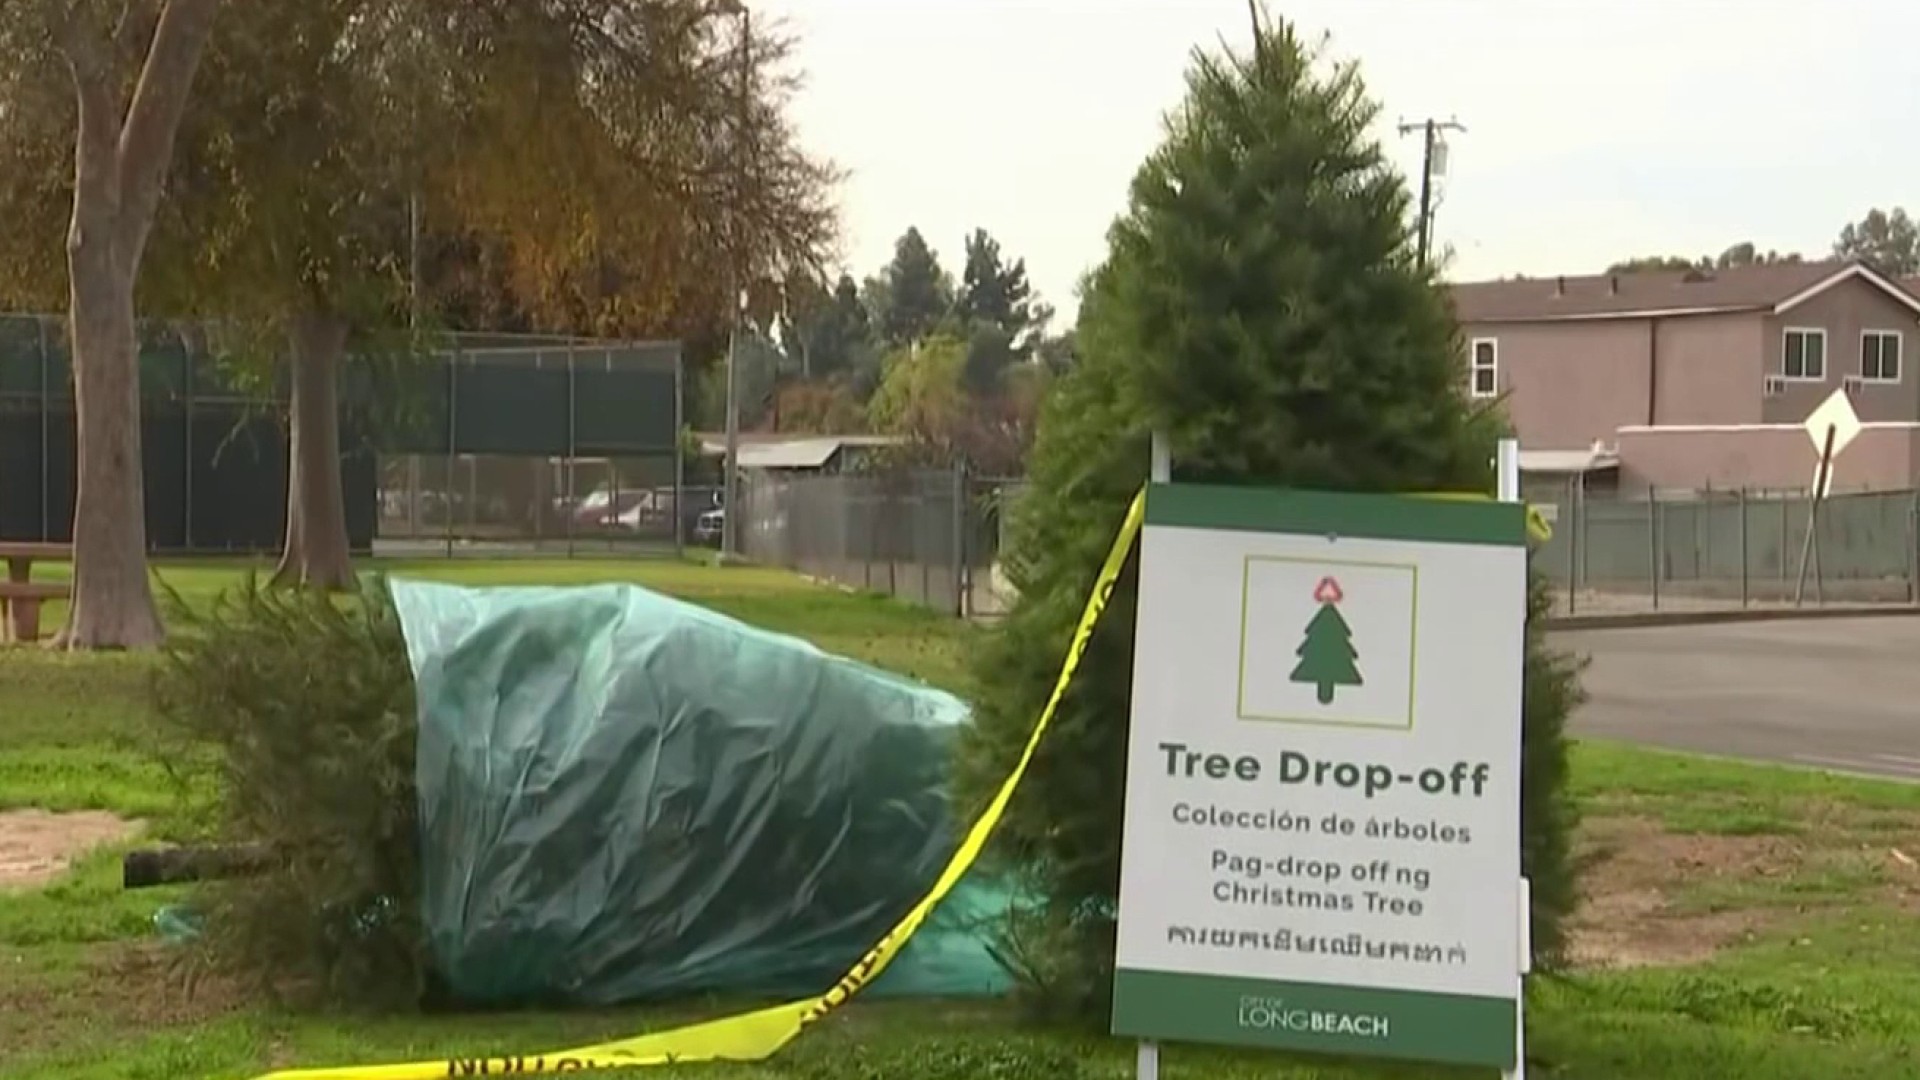 Long Beach Residents Can Recycle Christmas Trees Through City Program